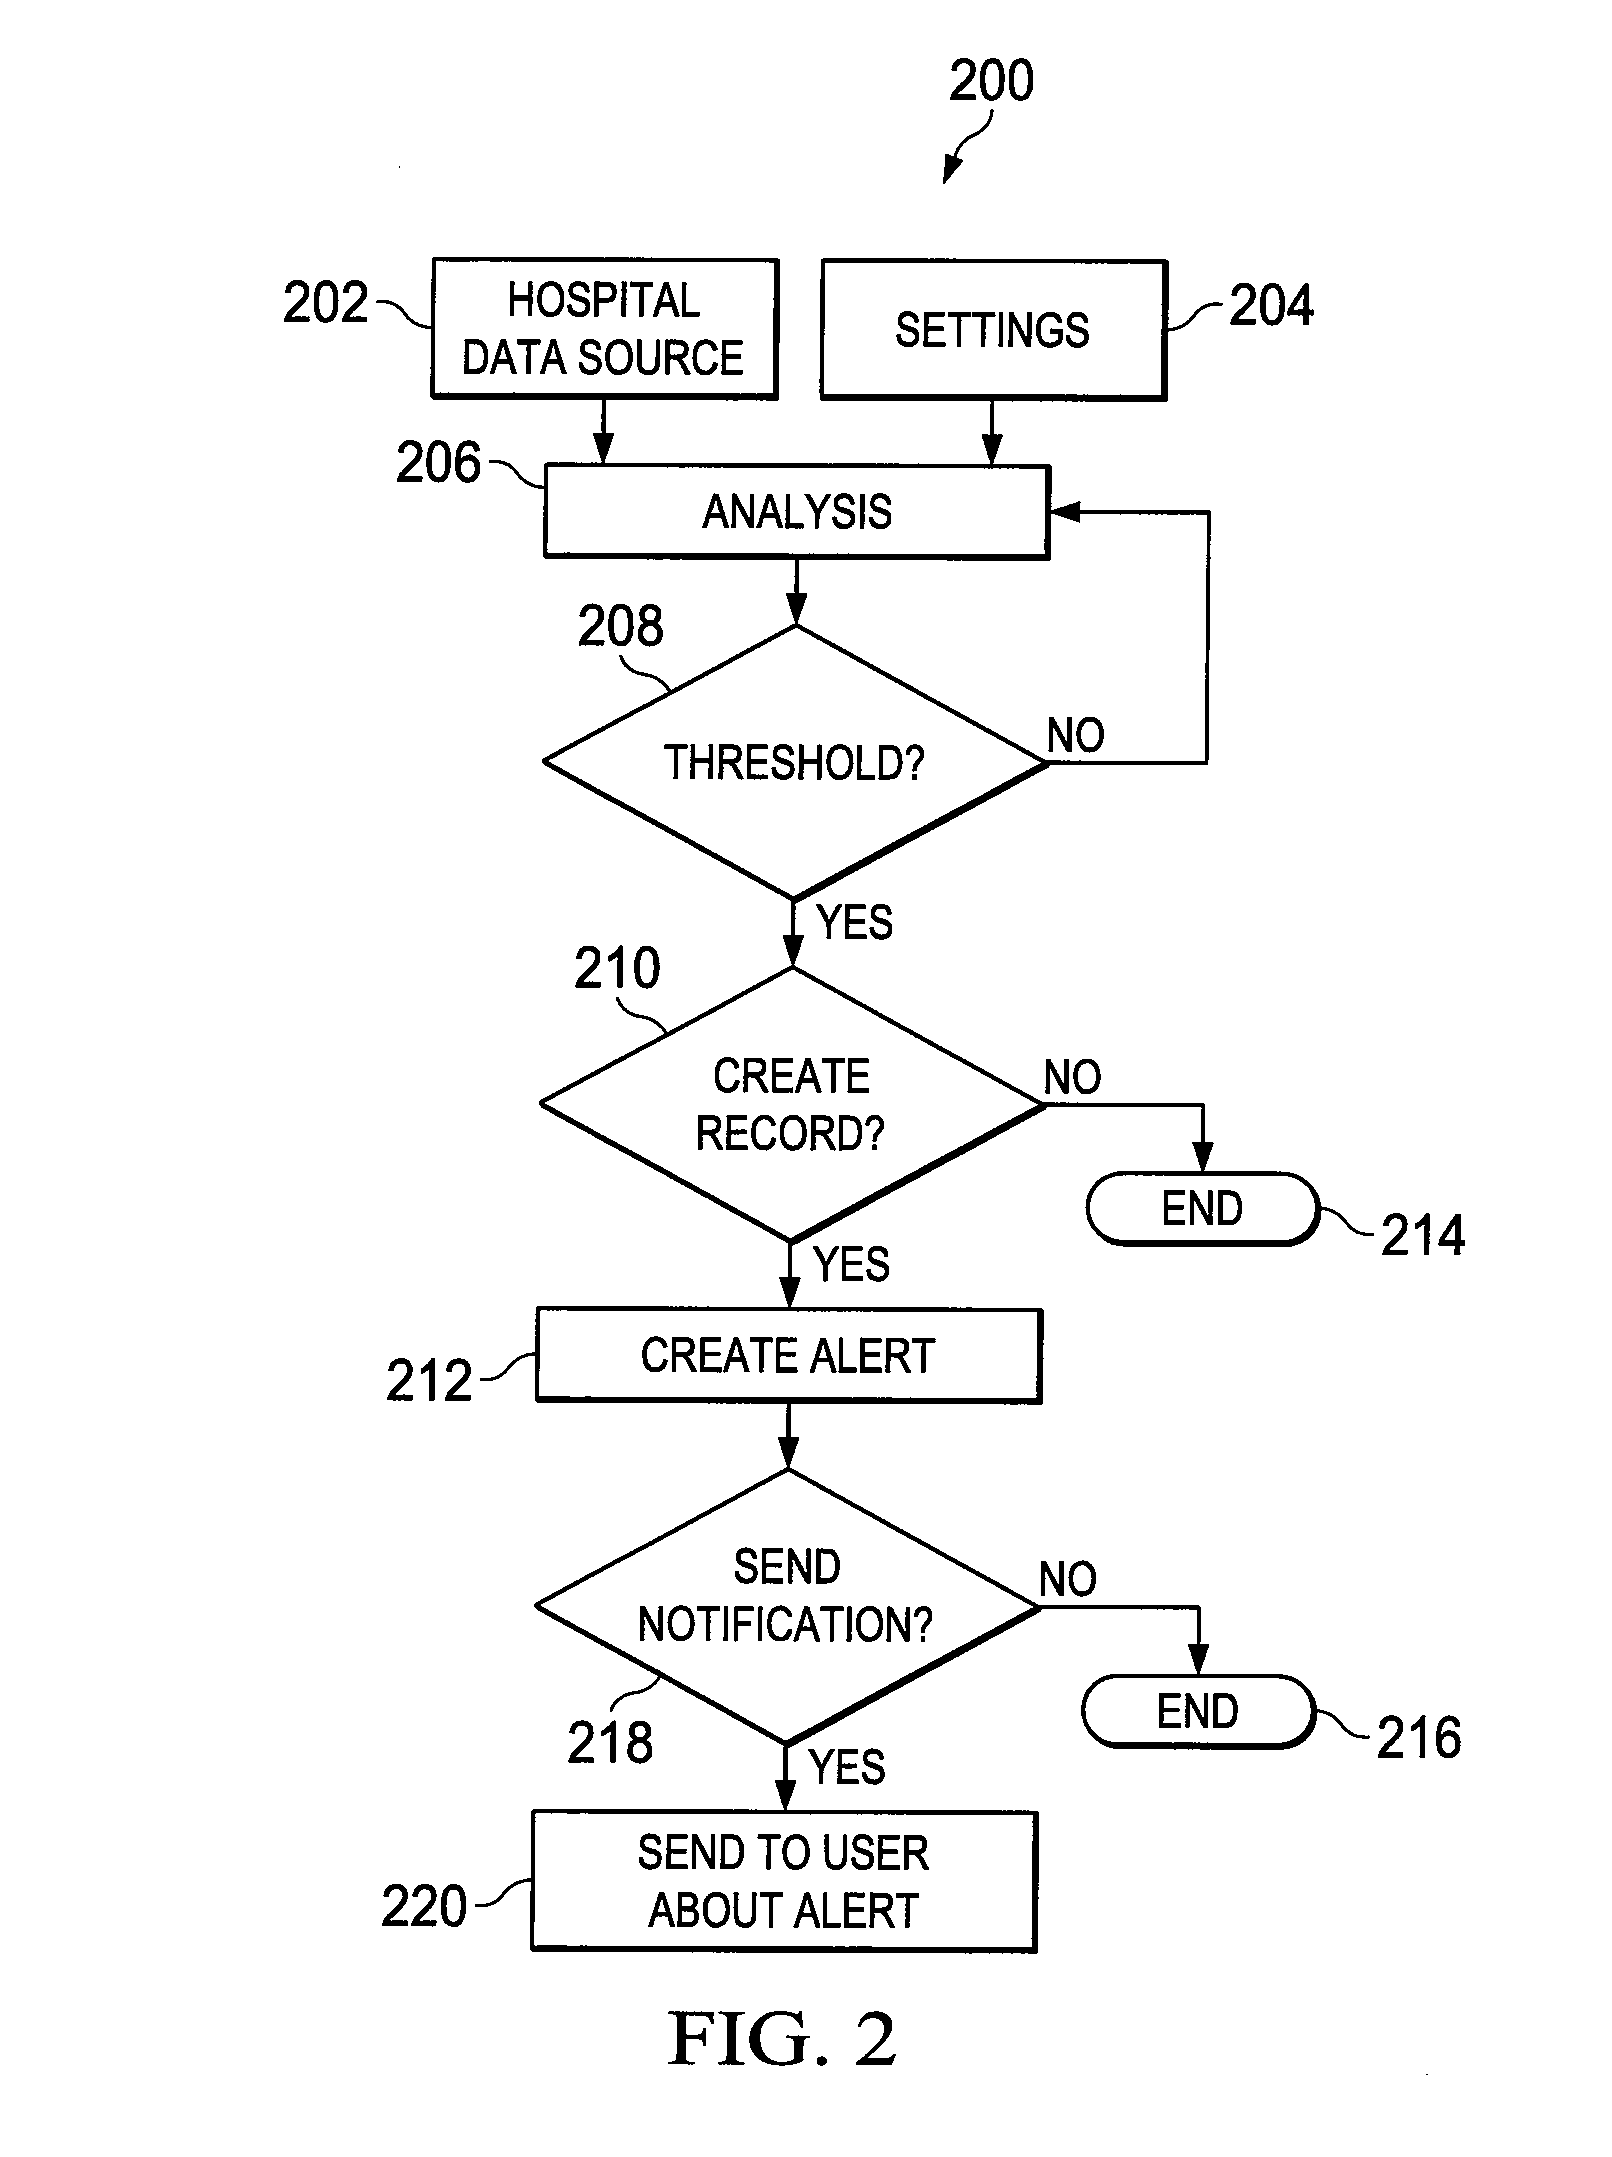 Real-Time Event Communication and Management System, Method and Computer Program Product